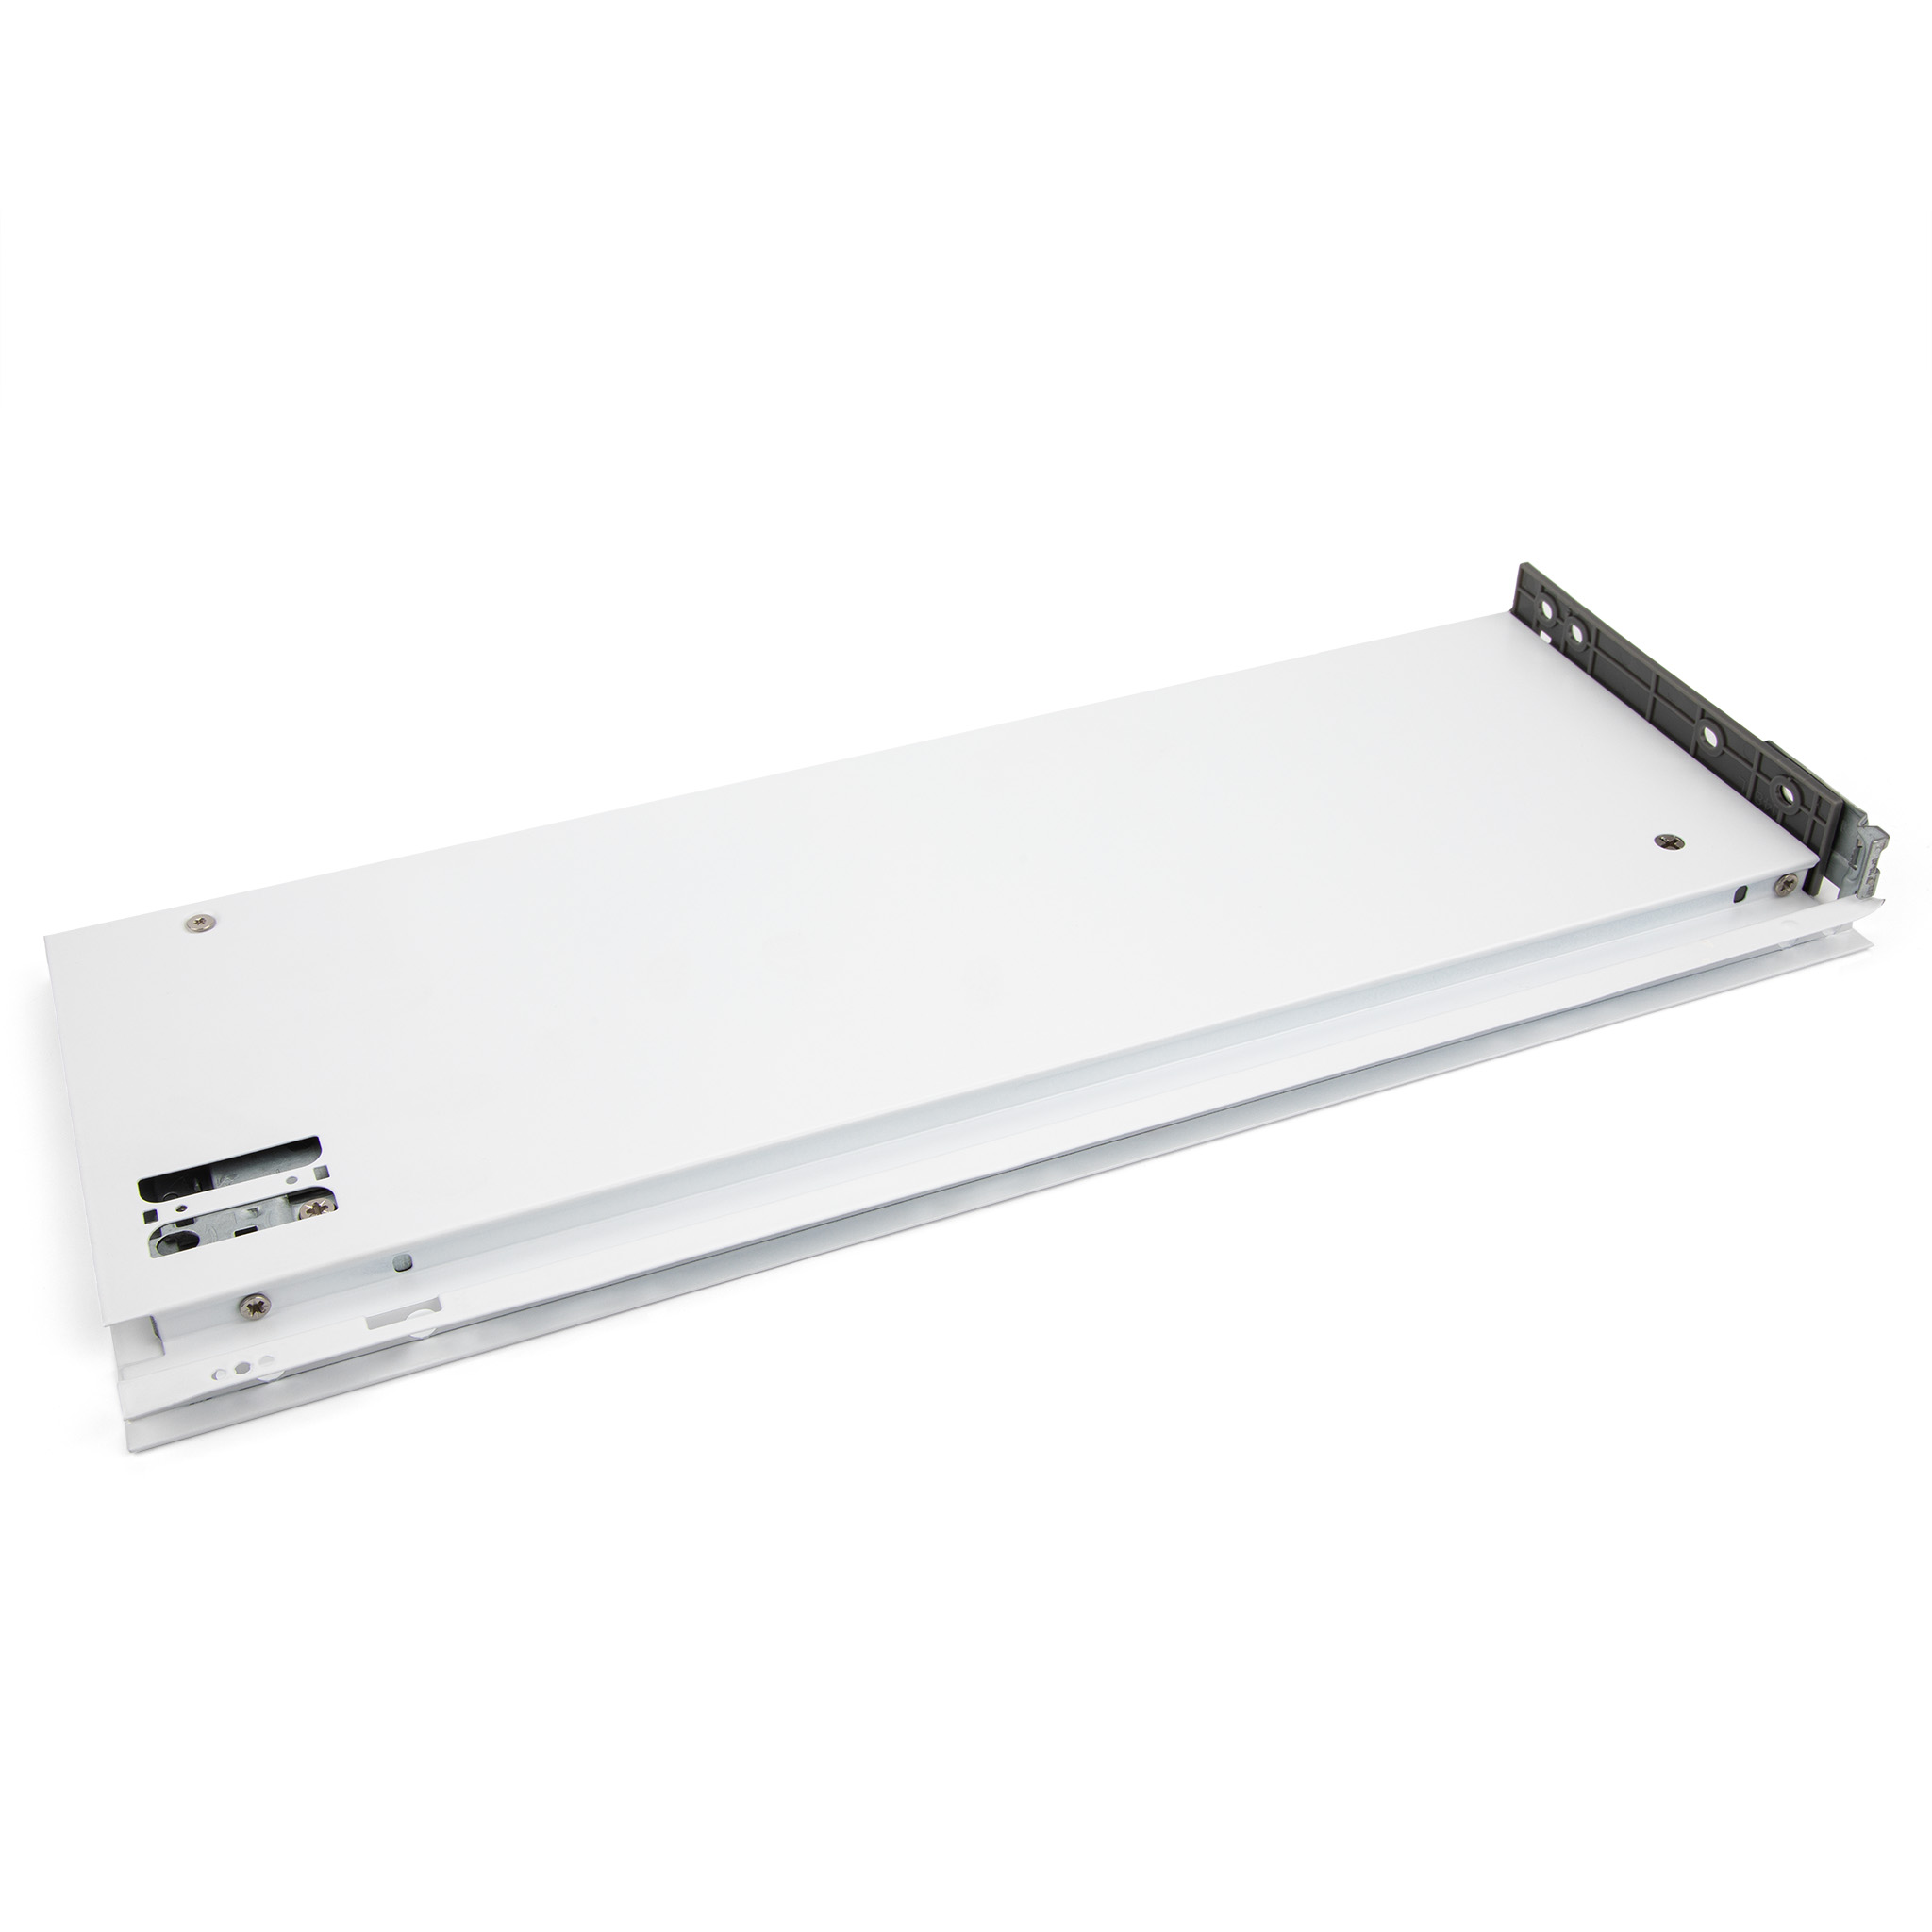 M-Series Fusion Side Wall, 450mm Length, 172mm Height, Lunar White